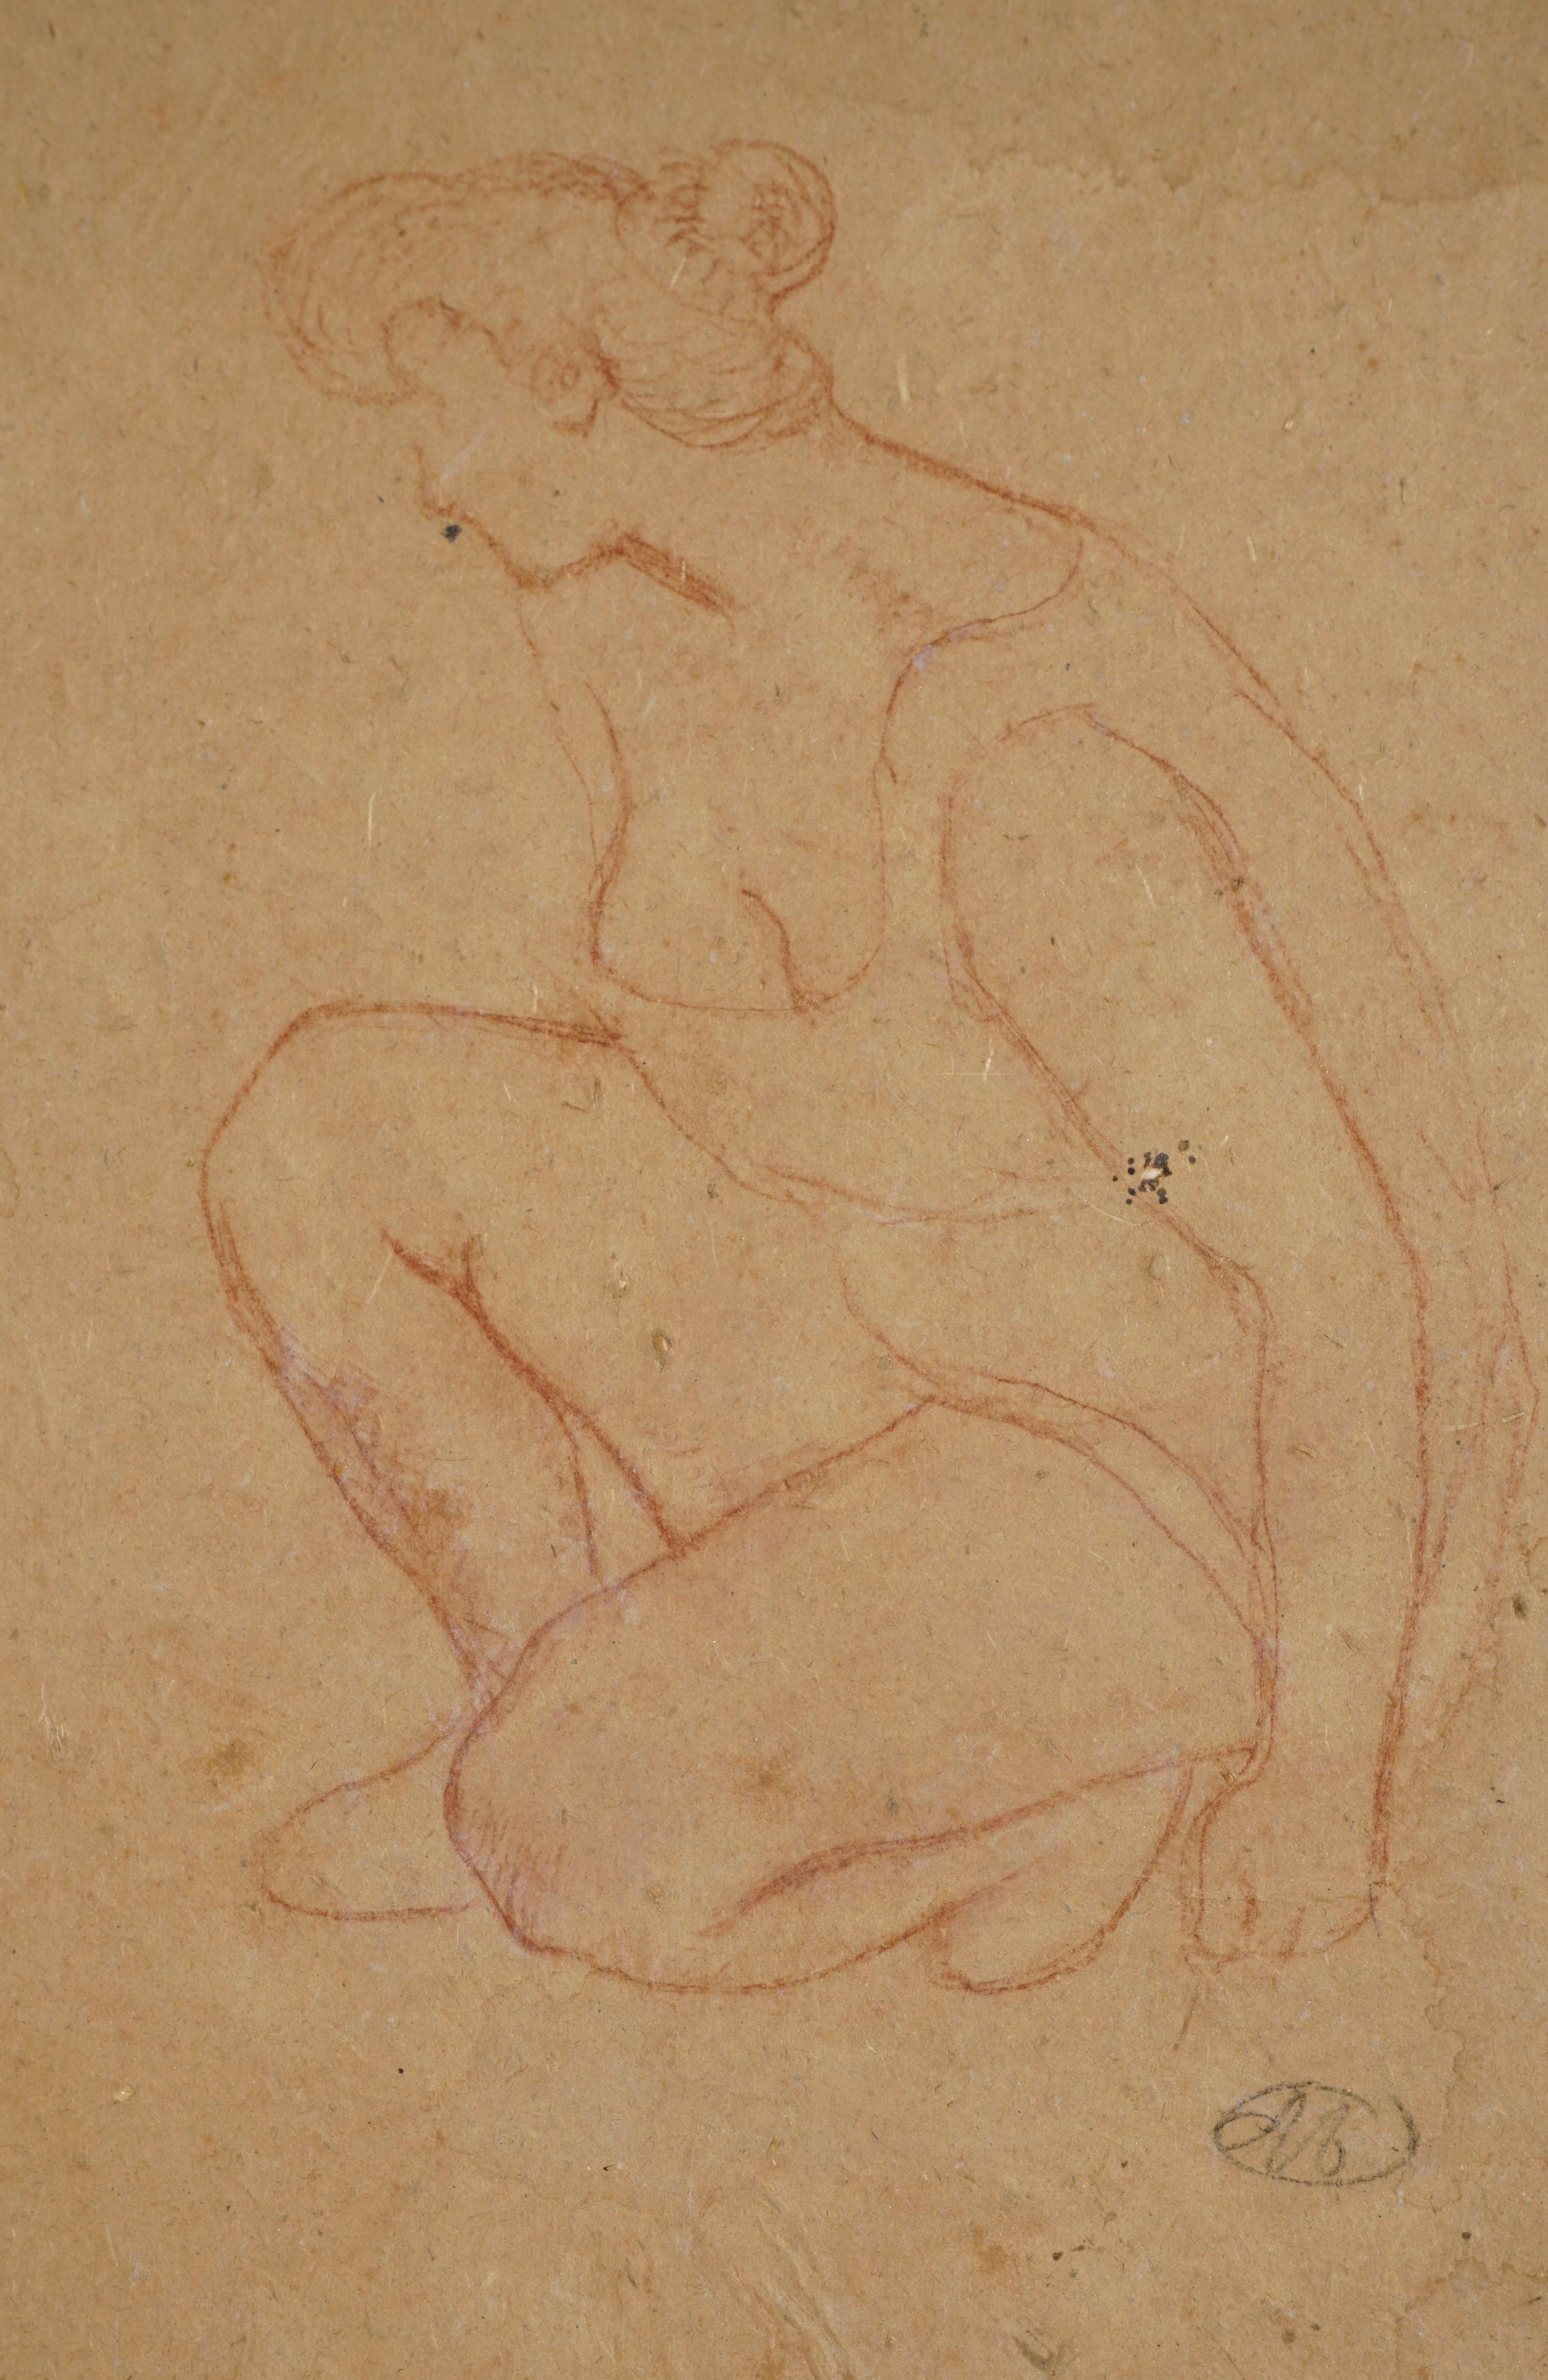 Hand-Painted Aristide Maillol Crayon Drawing, 1910